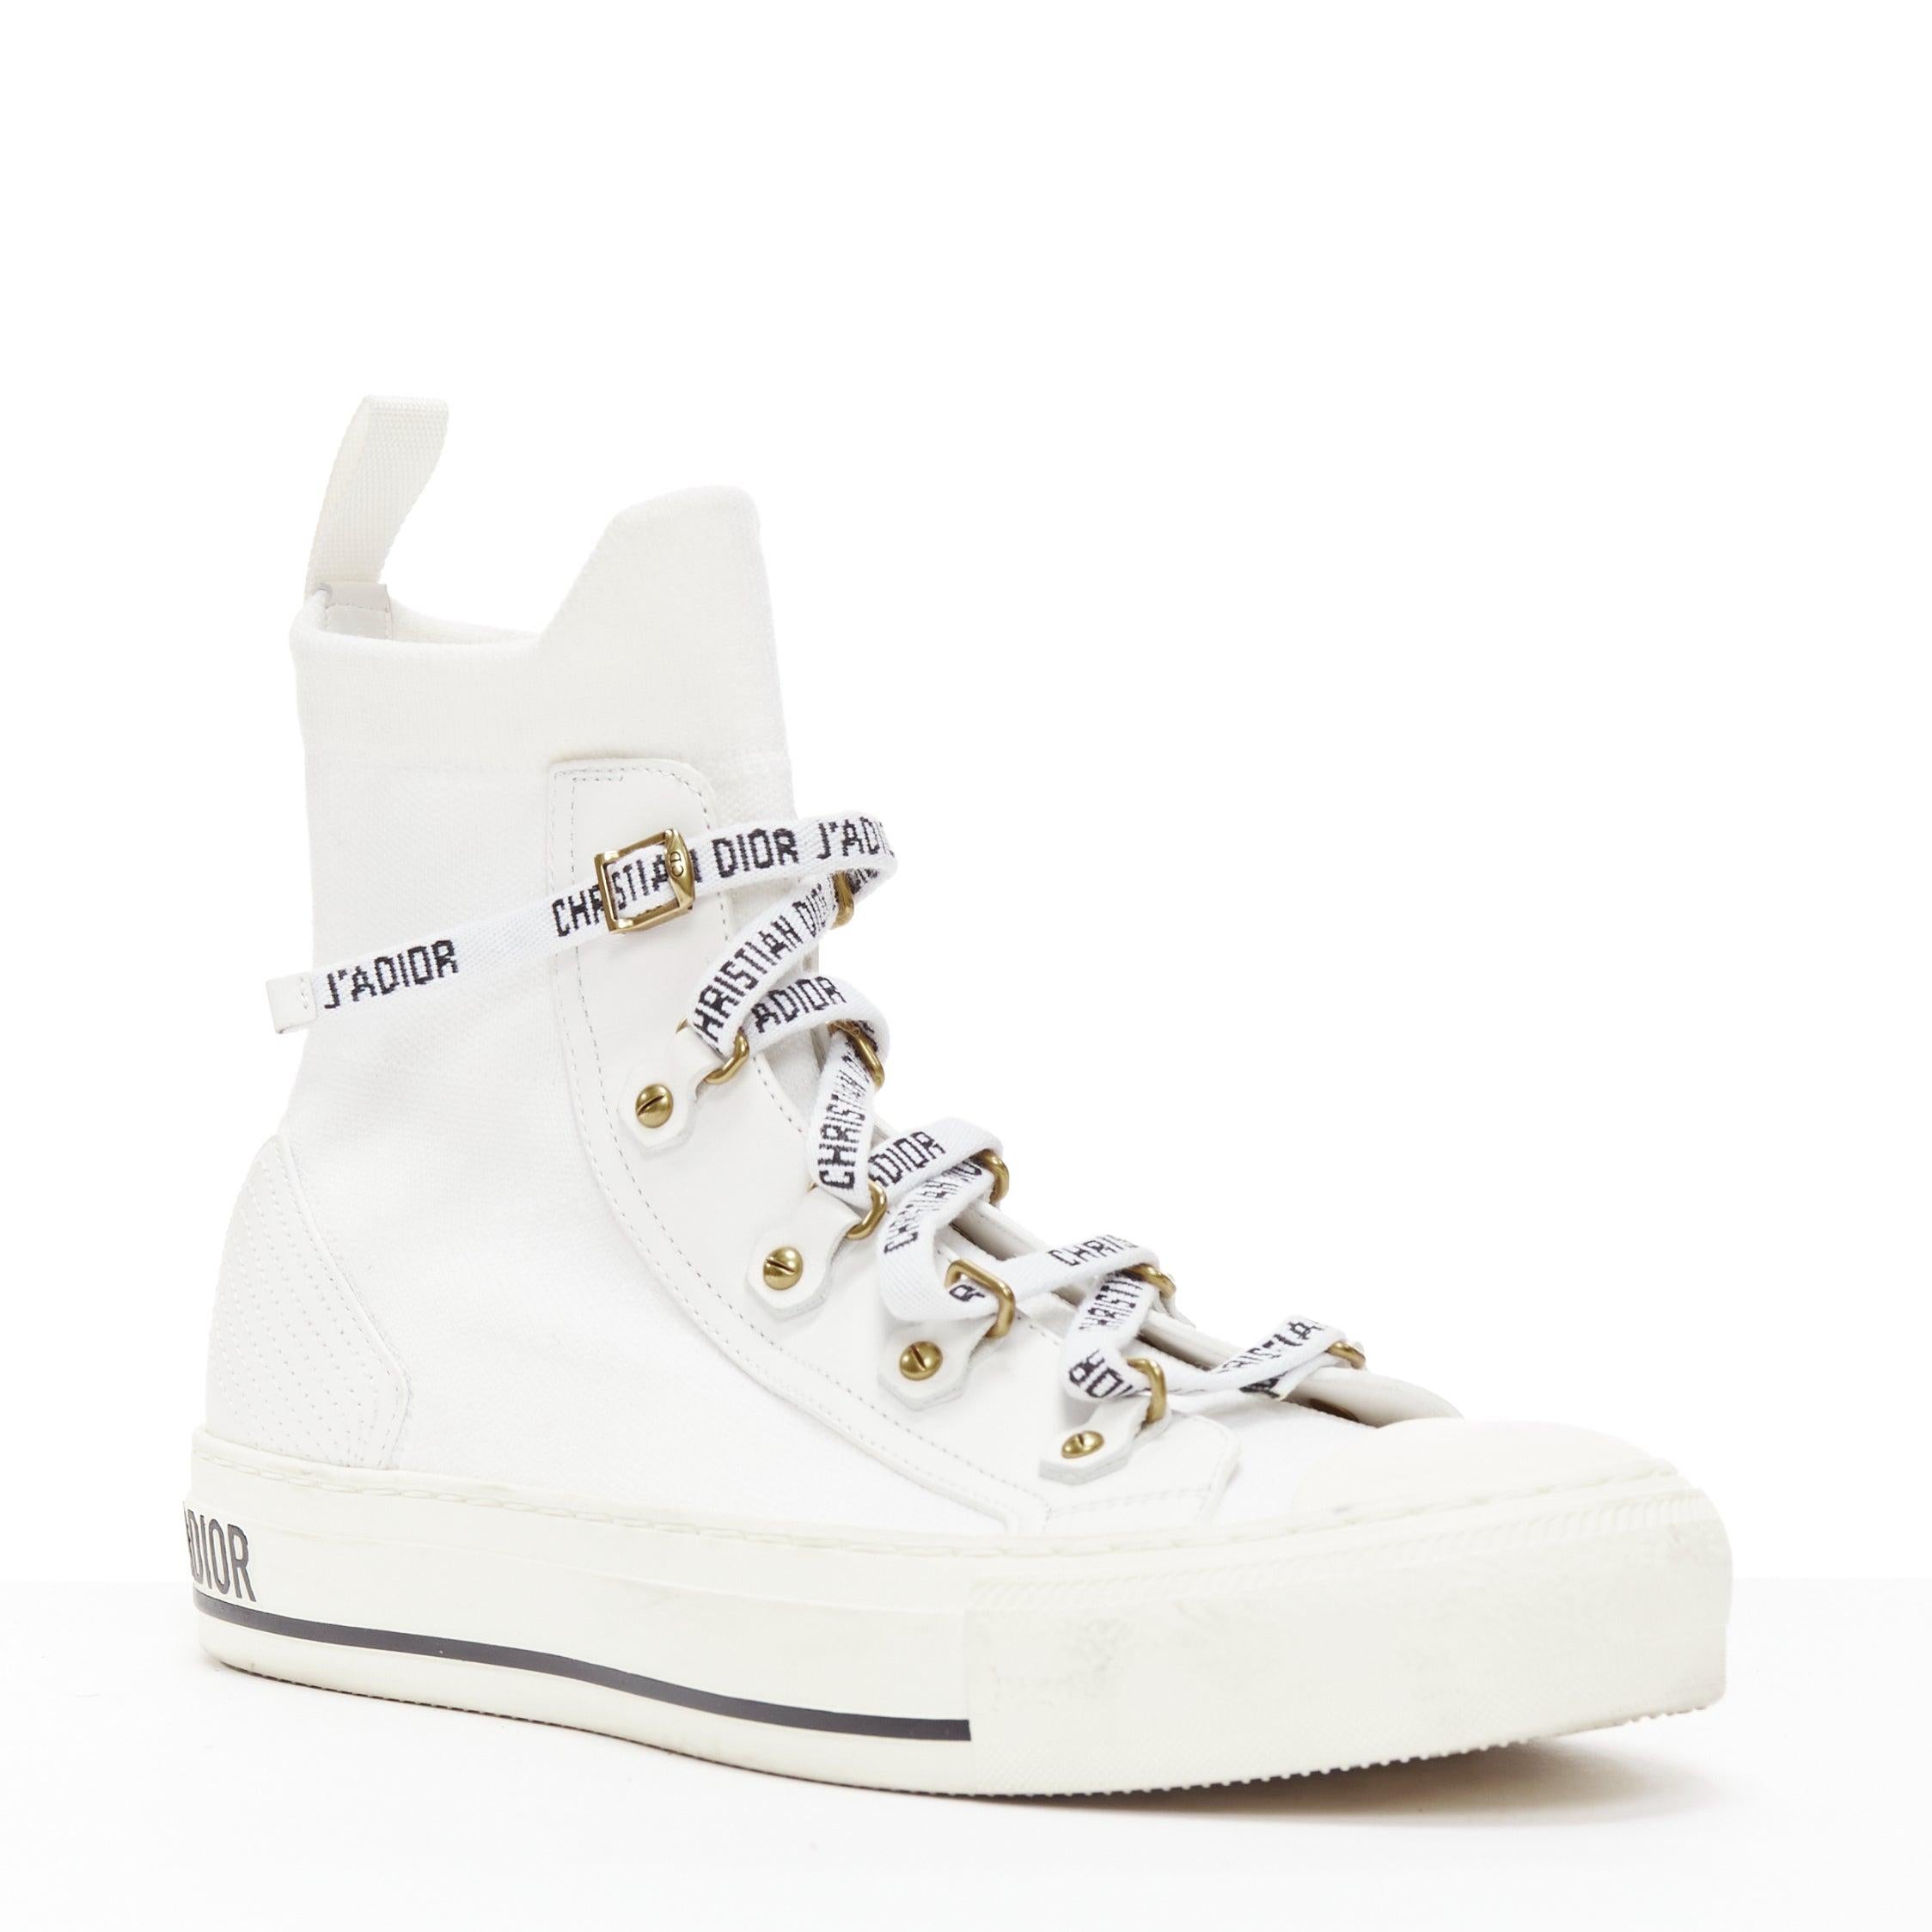 CHRISTIAN DIOR Walk'N'Dior white sock knit logo lace high top sneakers EU375
Reference: NKLL/A00120
Brand: Christian Dior
Collection: Walk'N'Dior
Material: Fabric, Rubber
Color: White, Black
Pattern: Solid
Closure: Lace Up
Extra Details: Technical